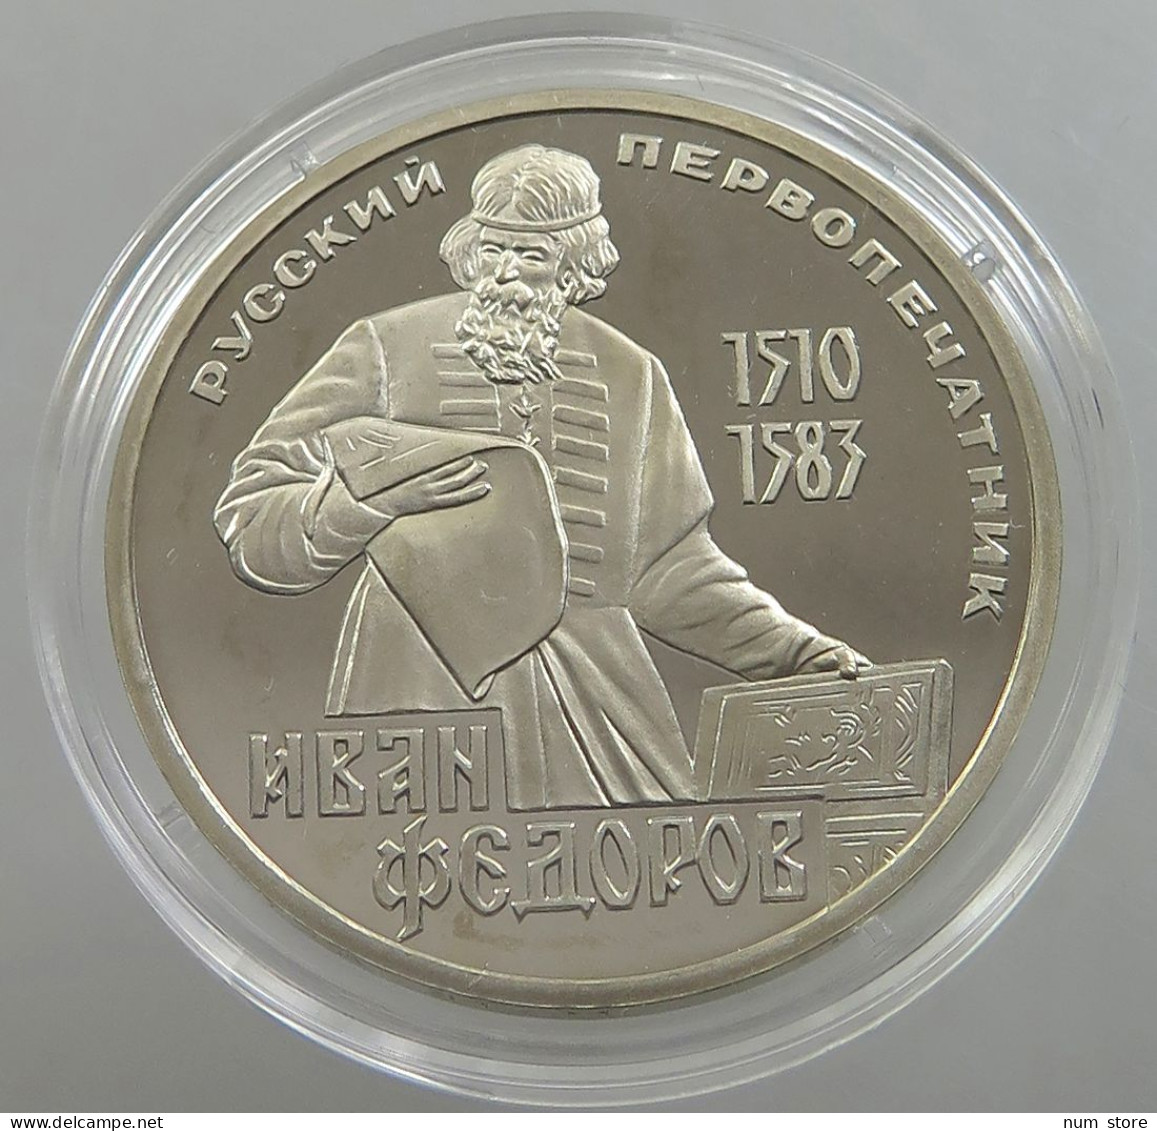 RUSSIA USSR 1 ROUBLE 1983 FEDOROV ORIGINAL PROOF #sm14 0607 - Russia